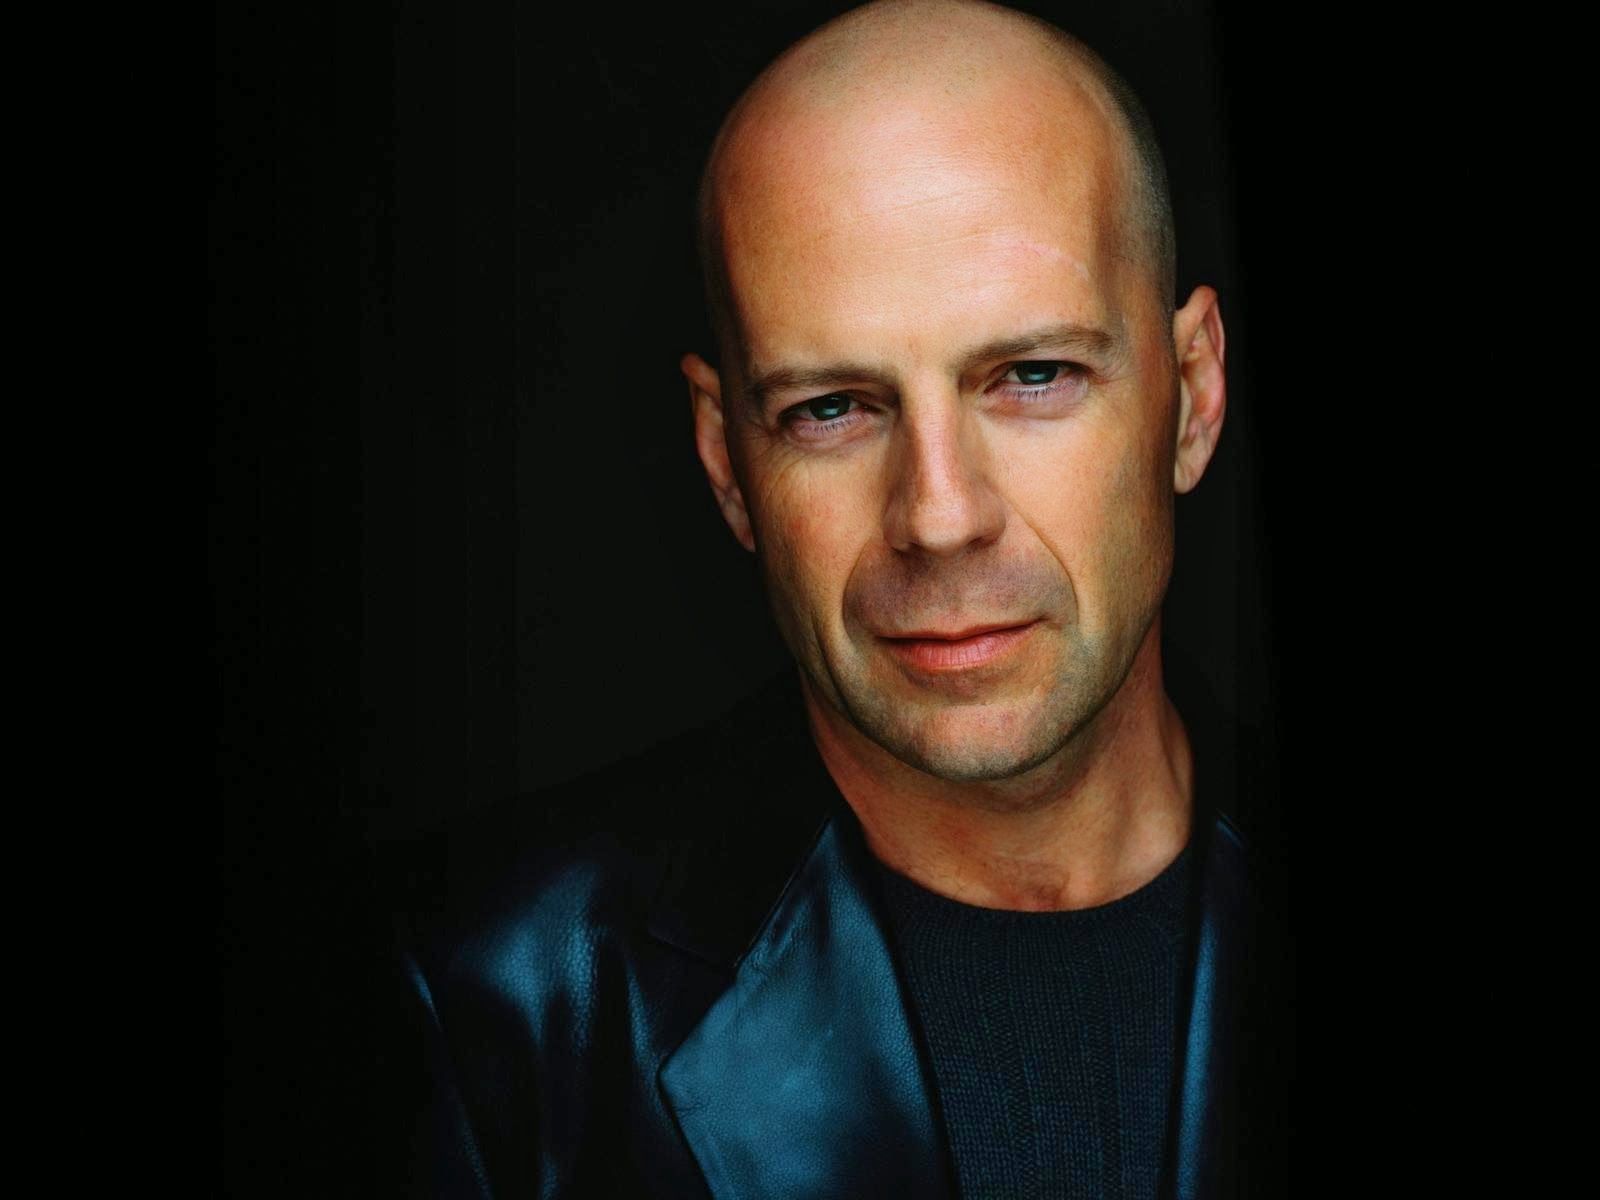 Bruce Willis   The King of Action movies Accolades   Actors and 1600x1200